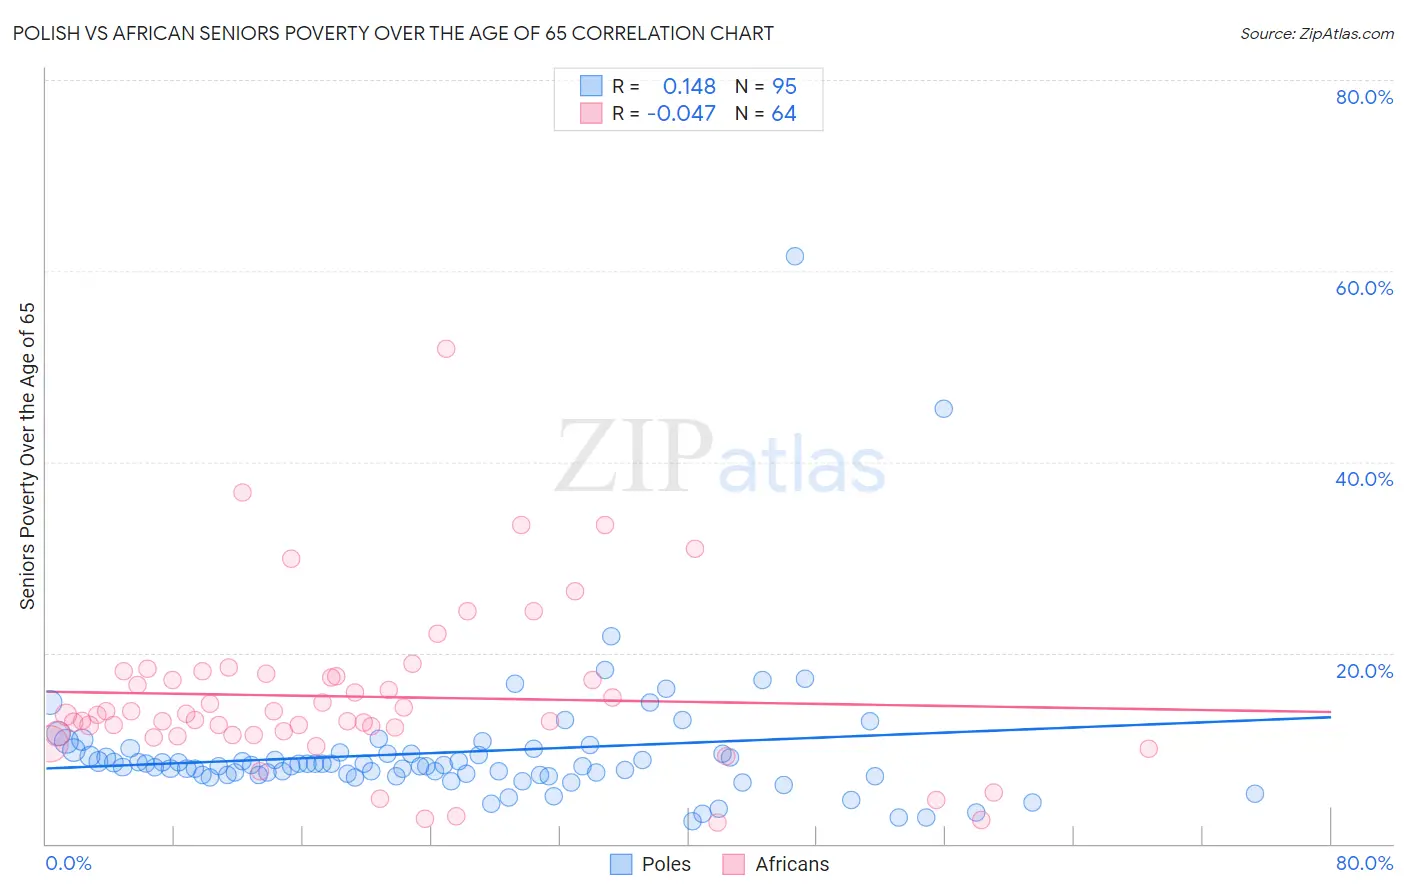 Polish vs African Seniors Poverty Over the Age of 65